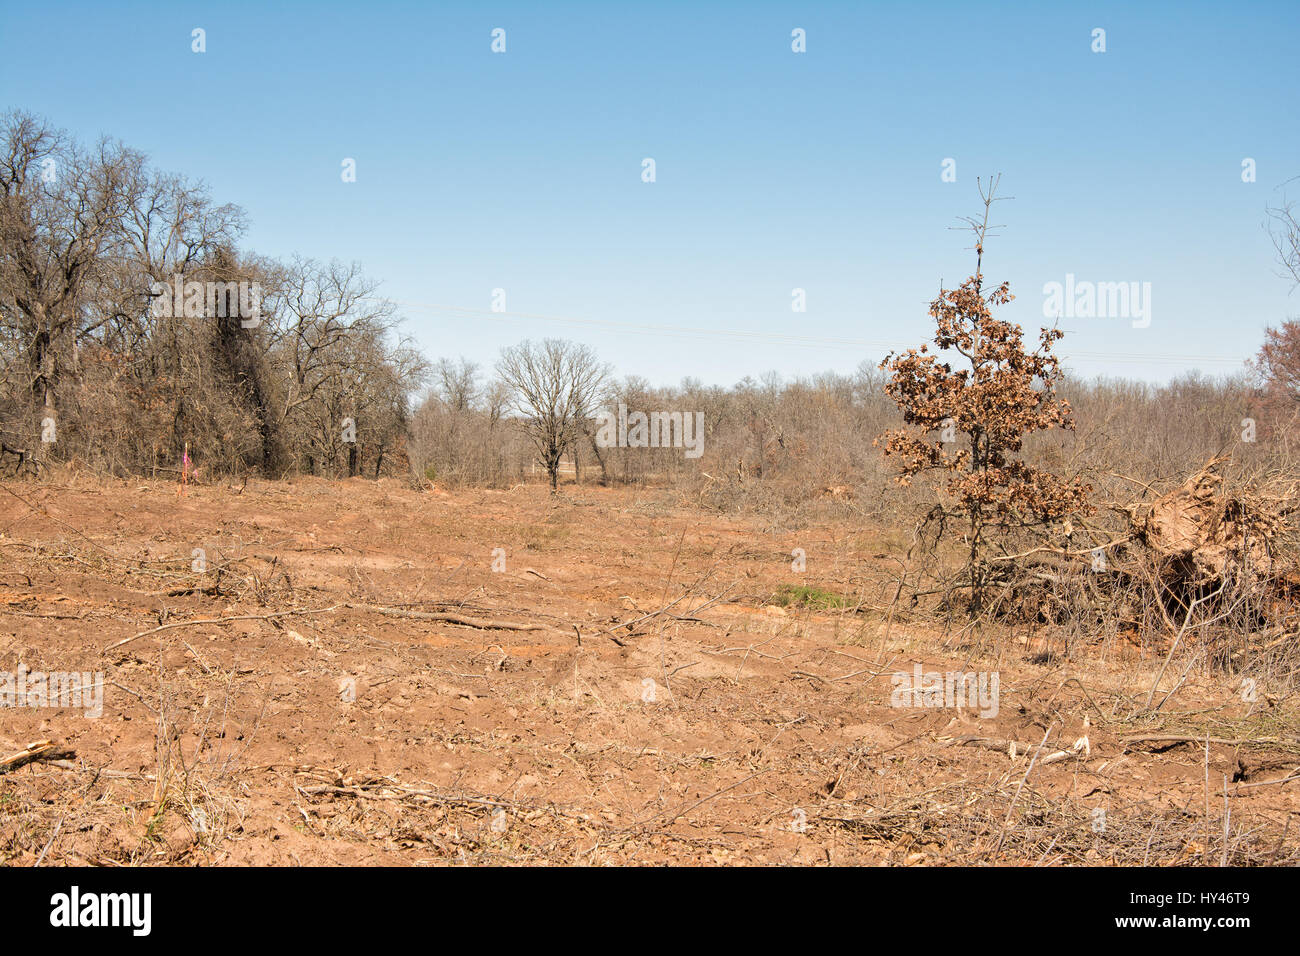 Damage in nature after bulldozing trees out of the area Stock Photo